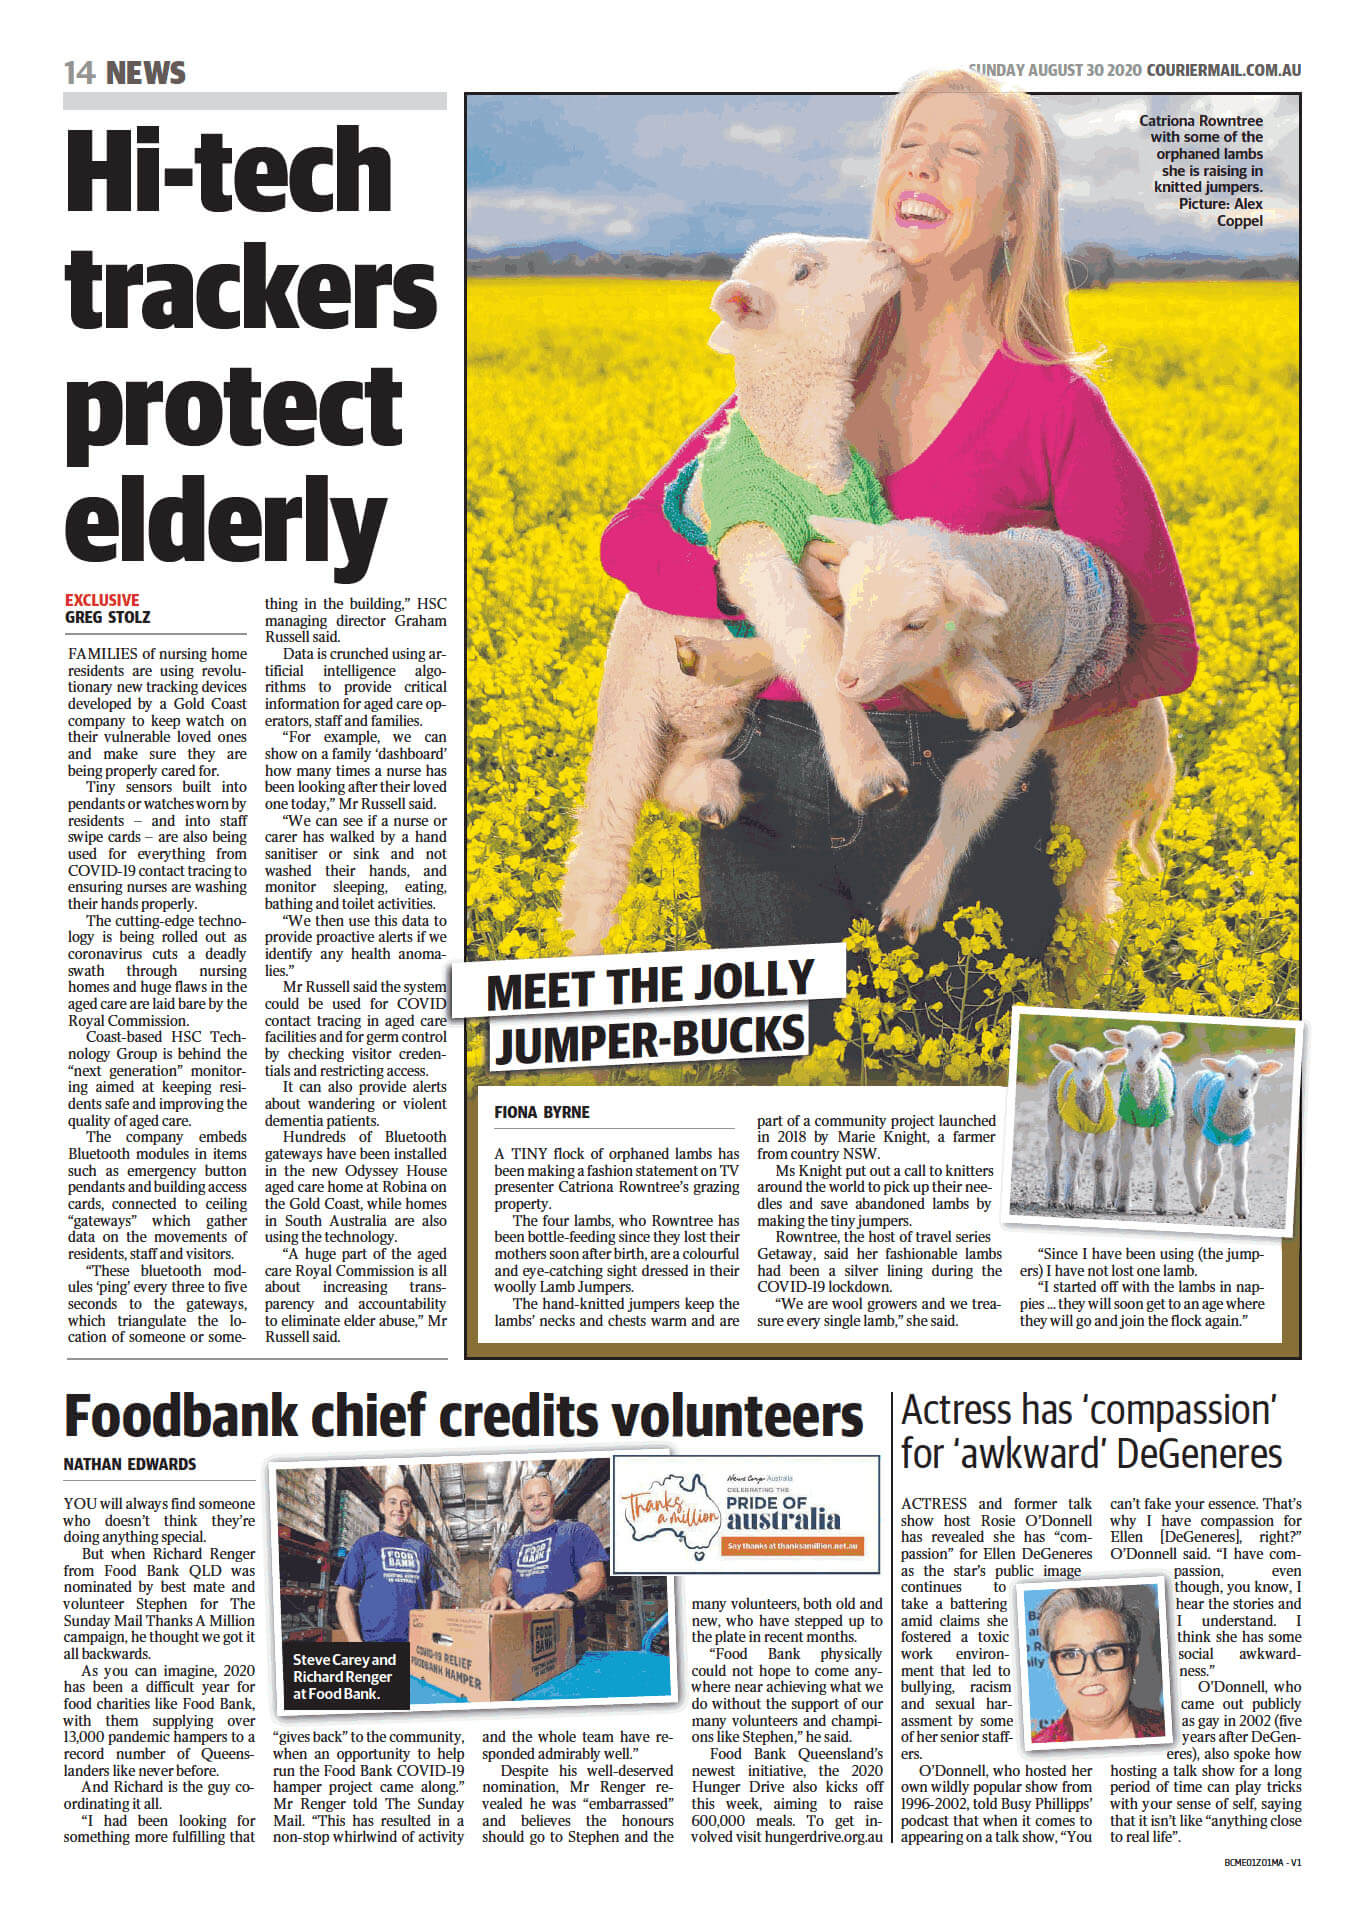 The Courier Mail – Homegrown hi-tech keeps tabs on elderly